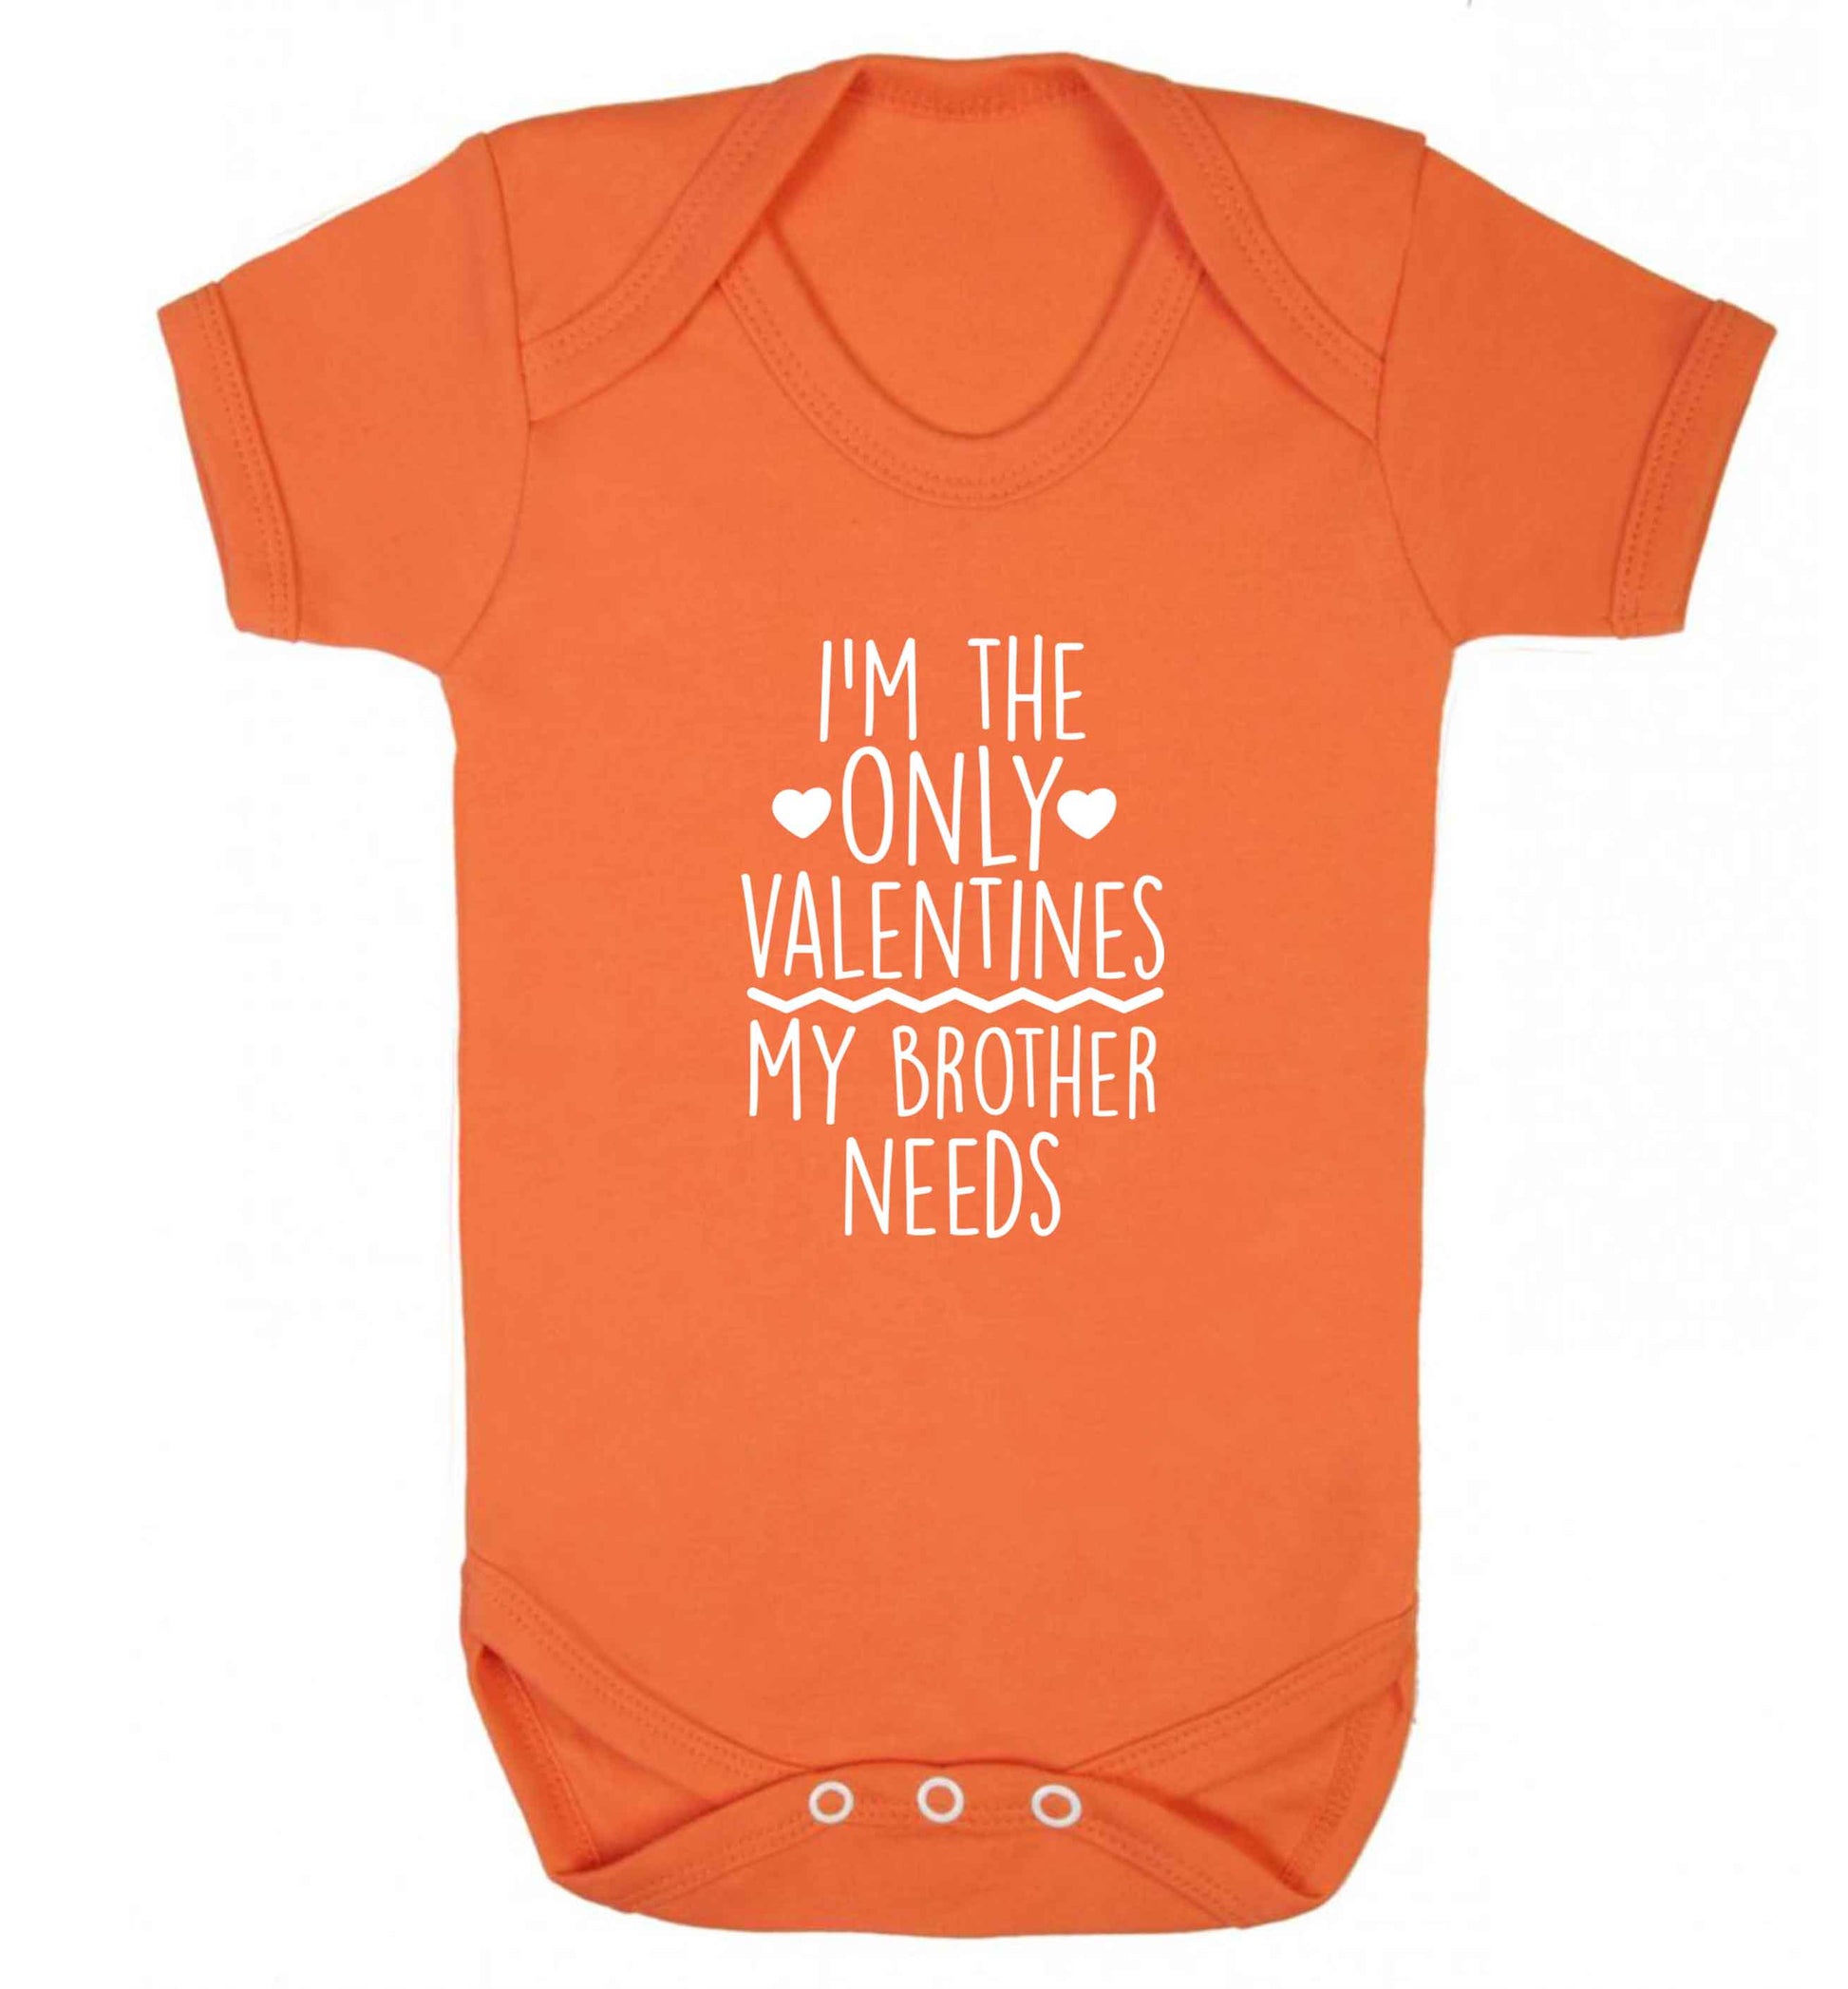 I'm the only valentines my brother needs baby vest orange 18-24 months